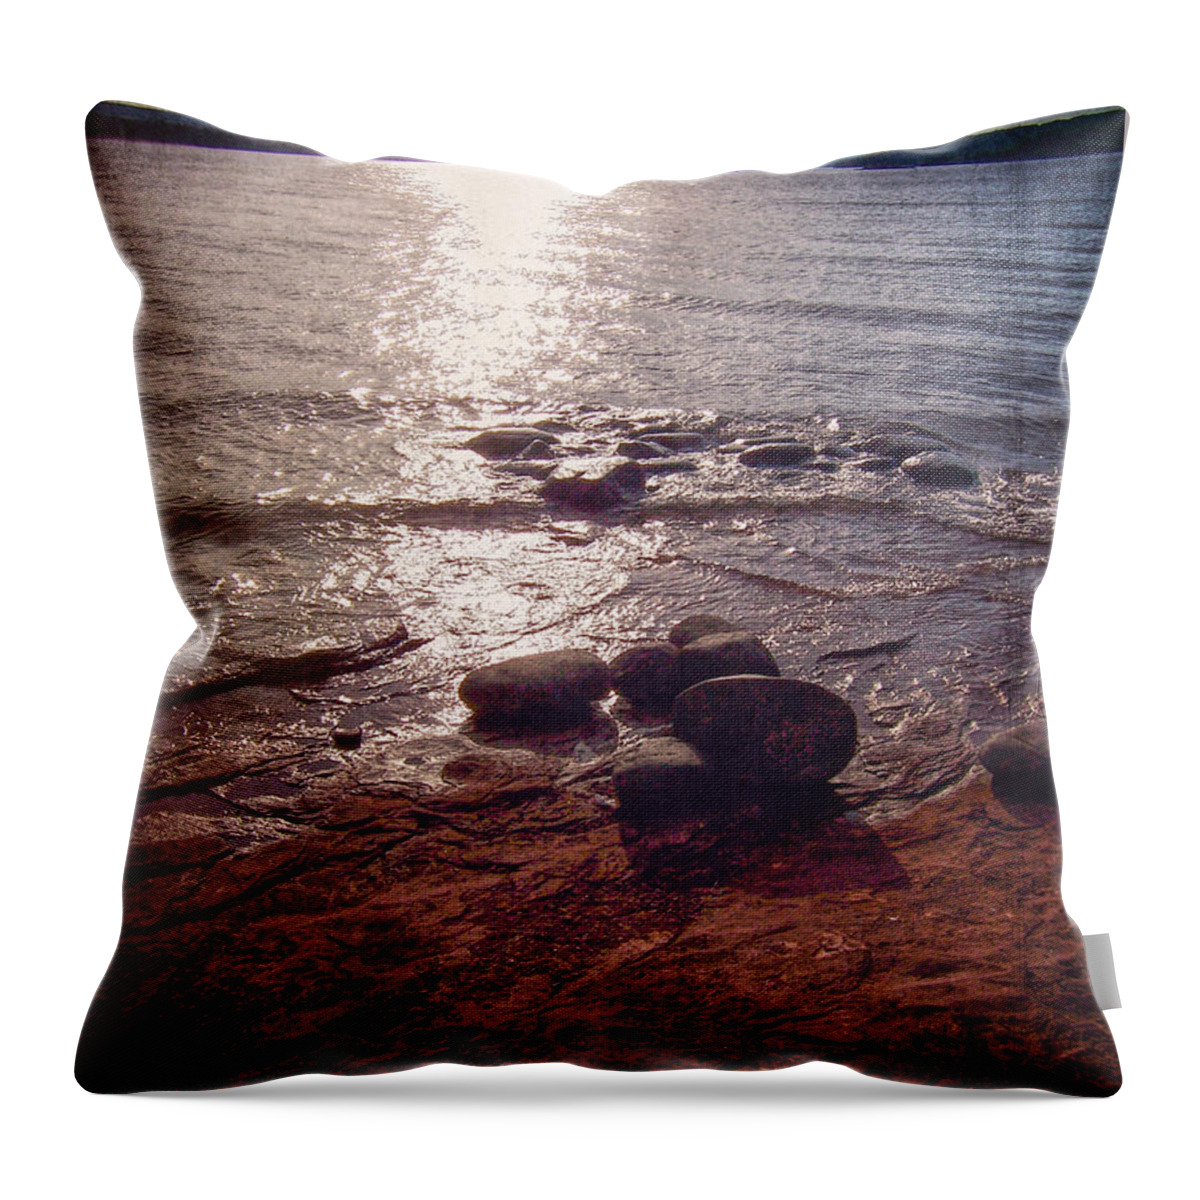 Reflections Throw Pillow featuring the digital art Reflections by Phil Perkins